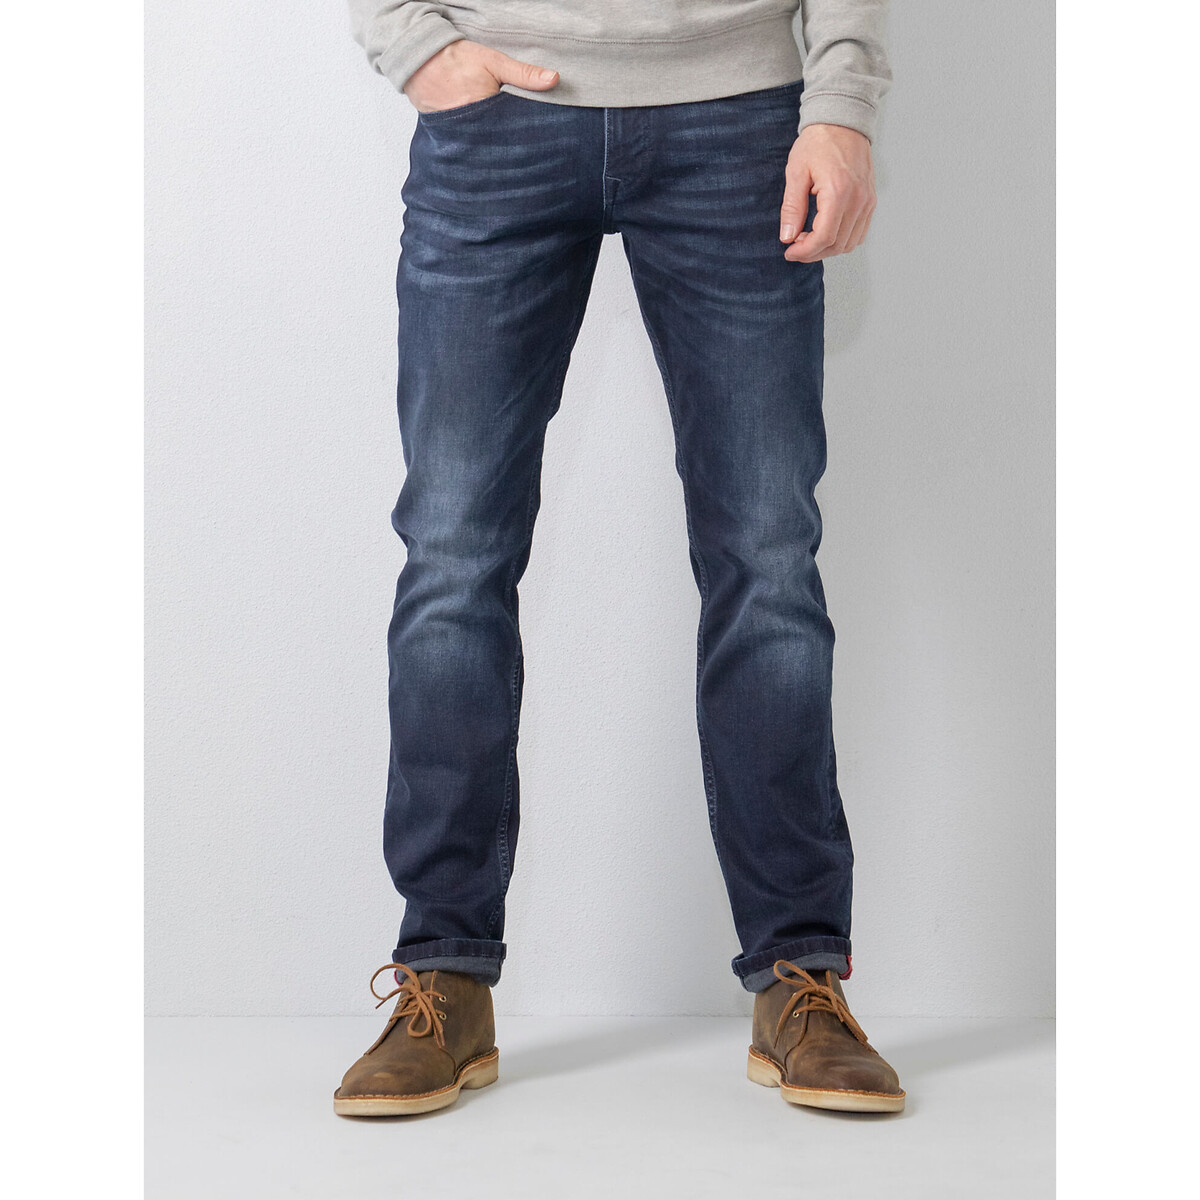 Russel straight jeans, Redoute rise mid Petrol | Industries La stretch